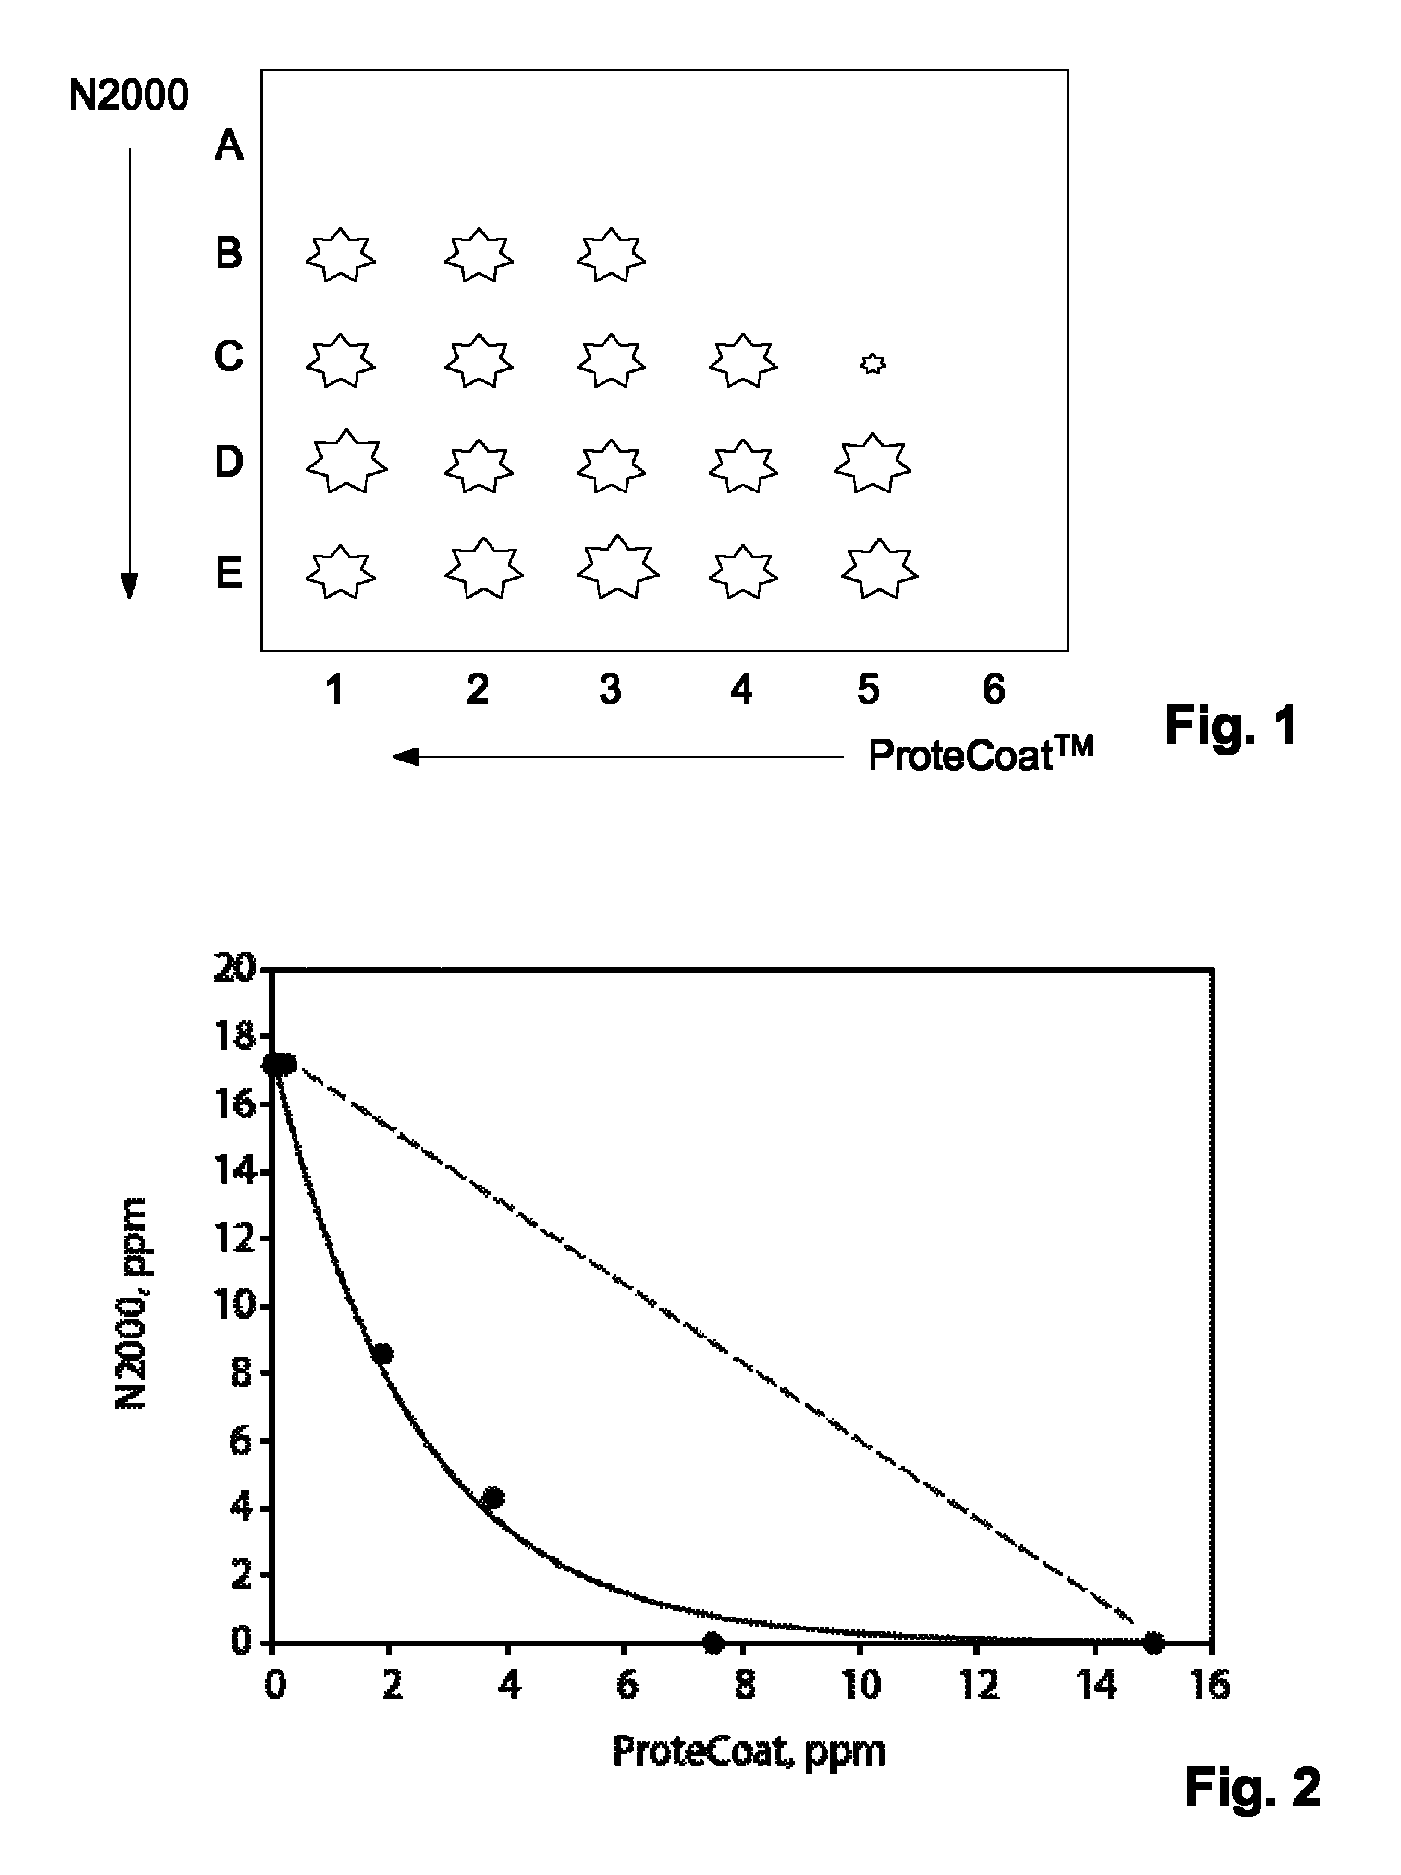 Coating compositions having peptidic antimicrobial additives and antimicrobial additives of other configurations